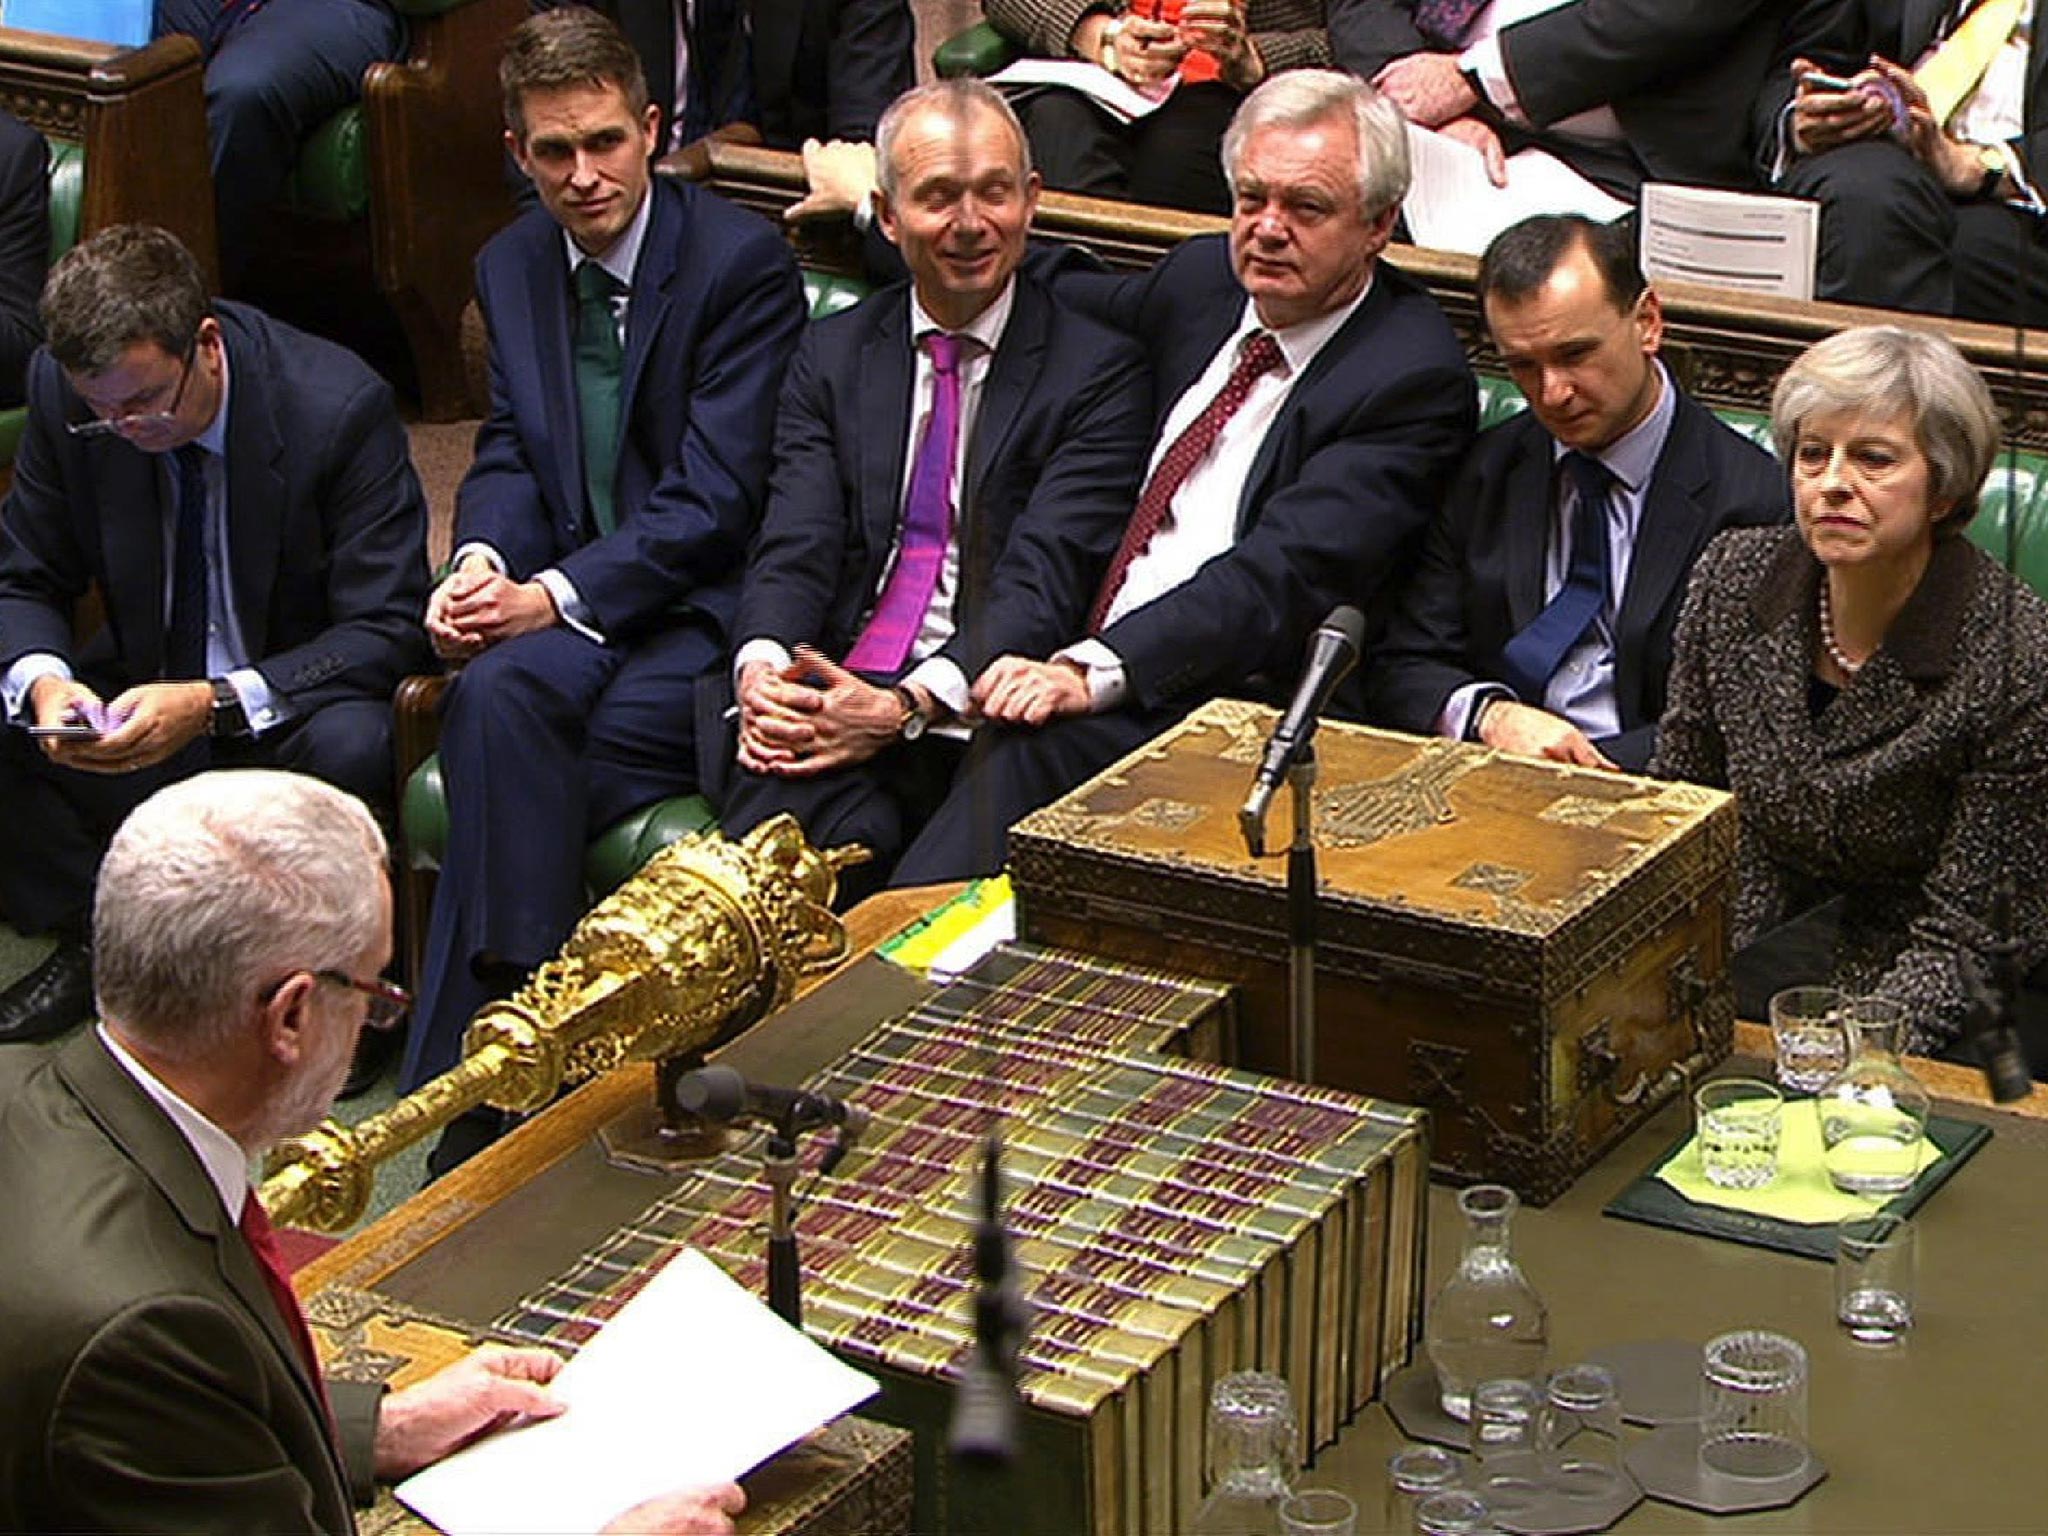 Jeremy Corbyn questions the PM in Parliament